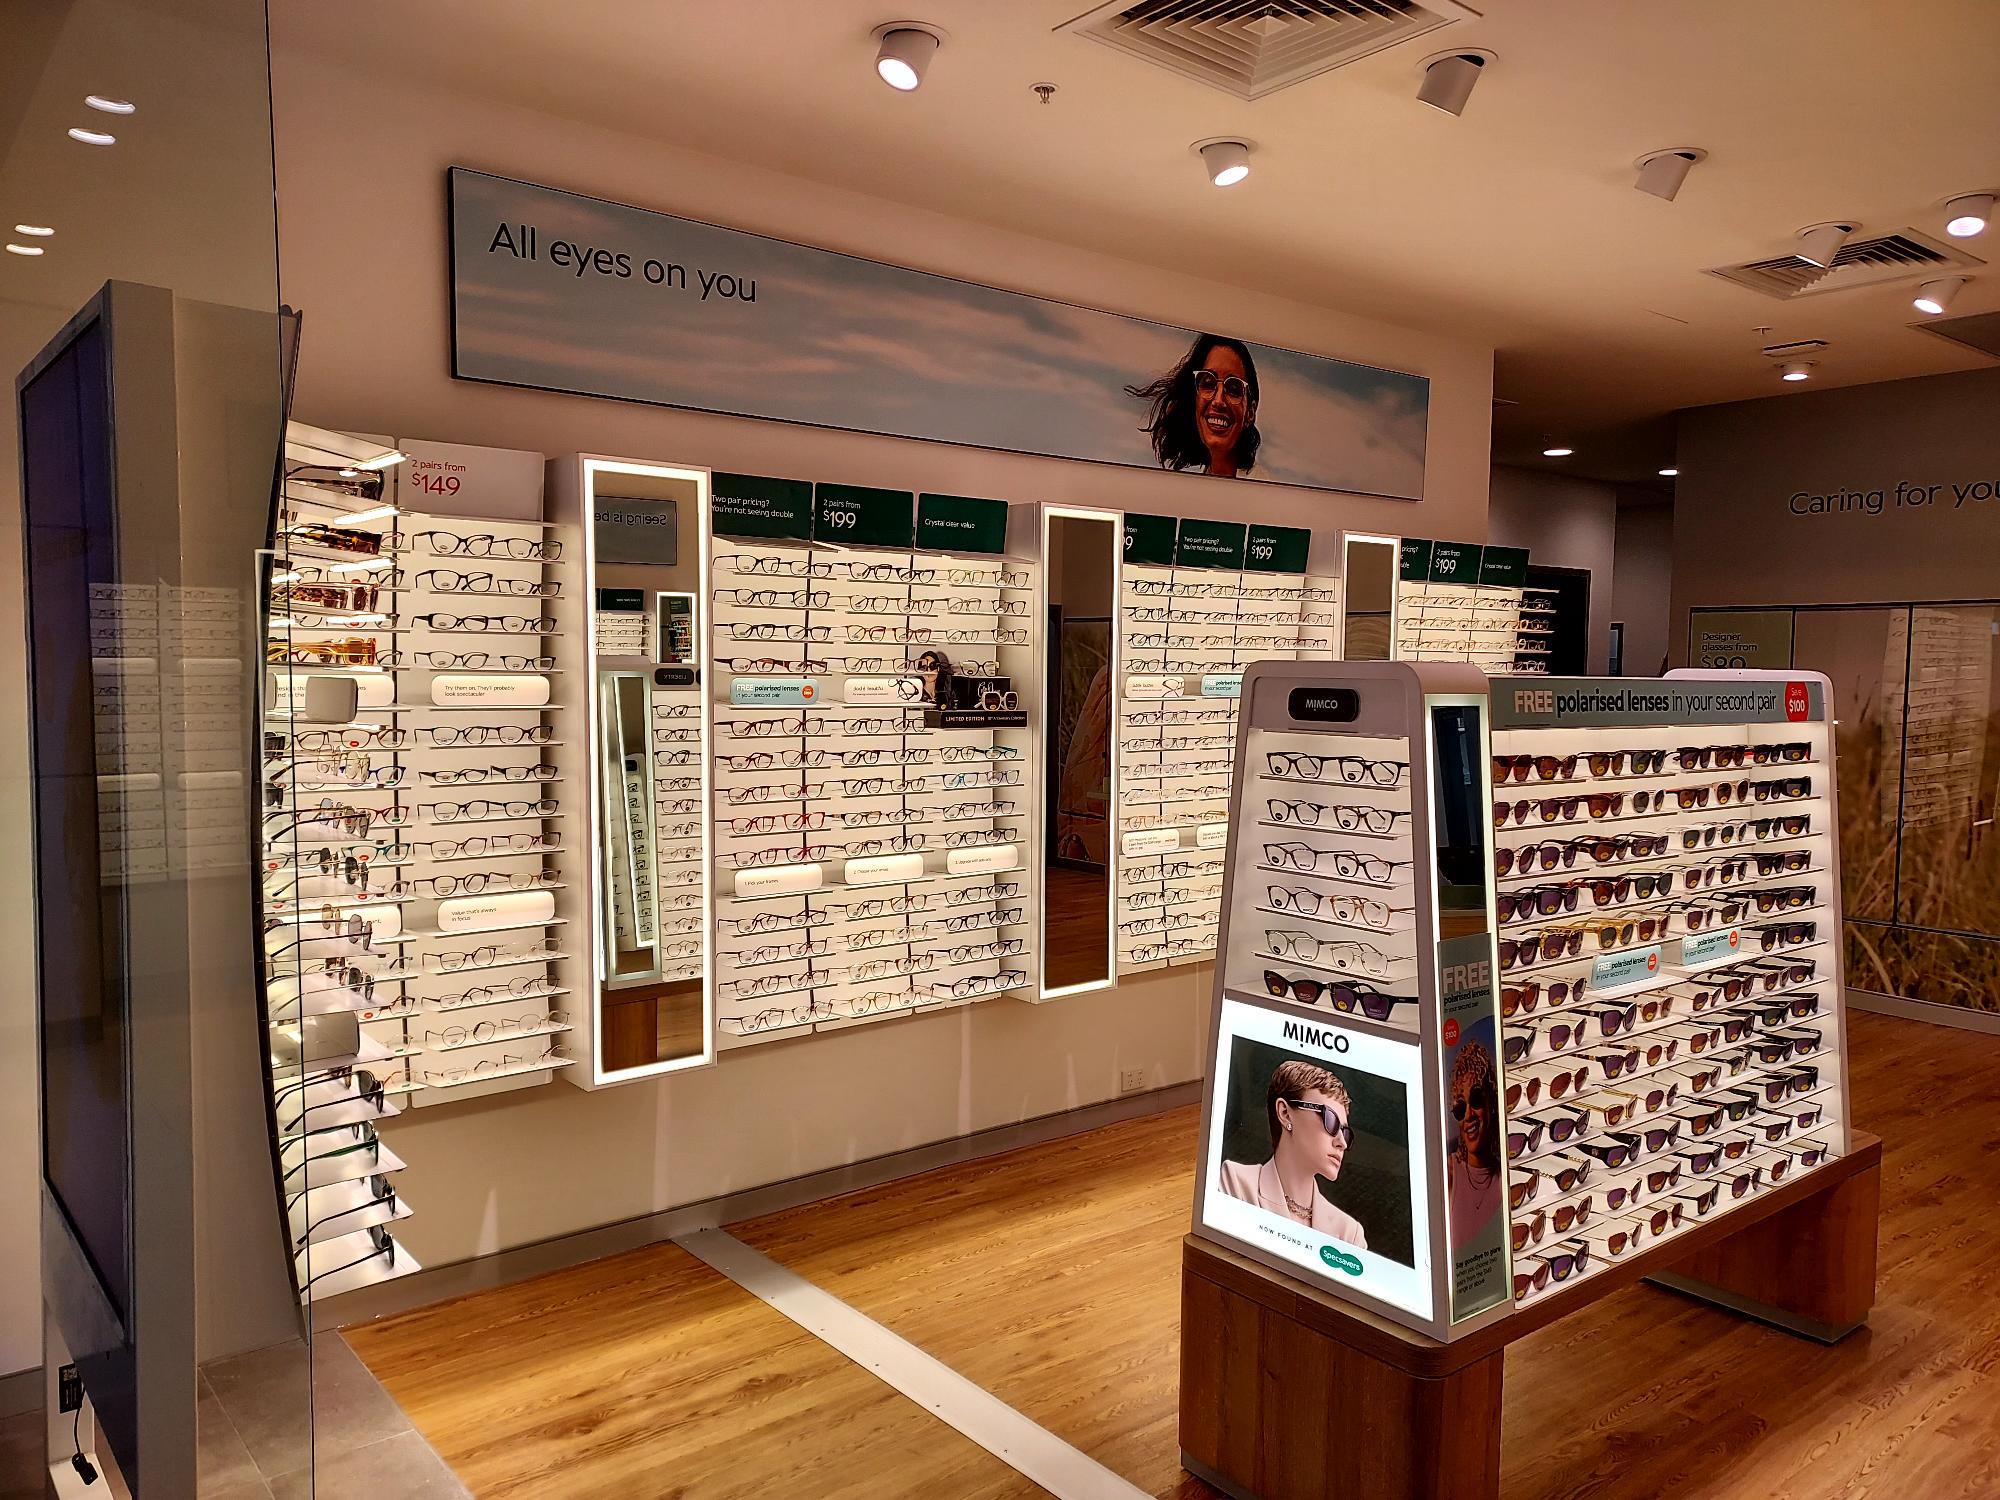 Images Specsavers Optometrists & Audiology - Chirnside Park S/C